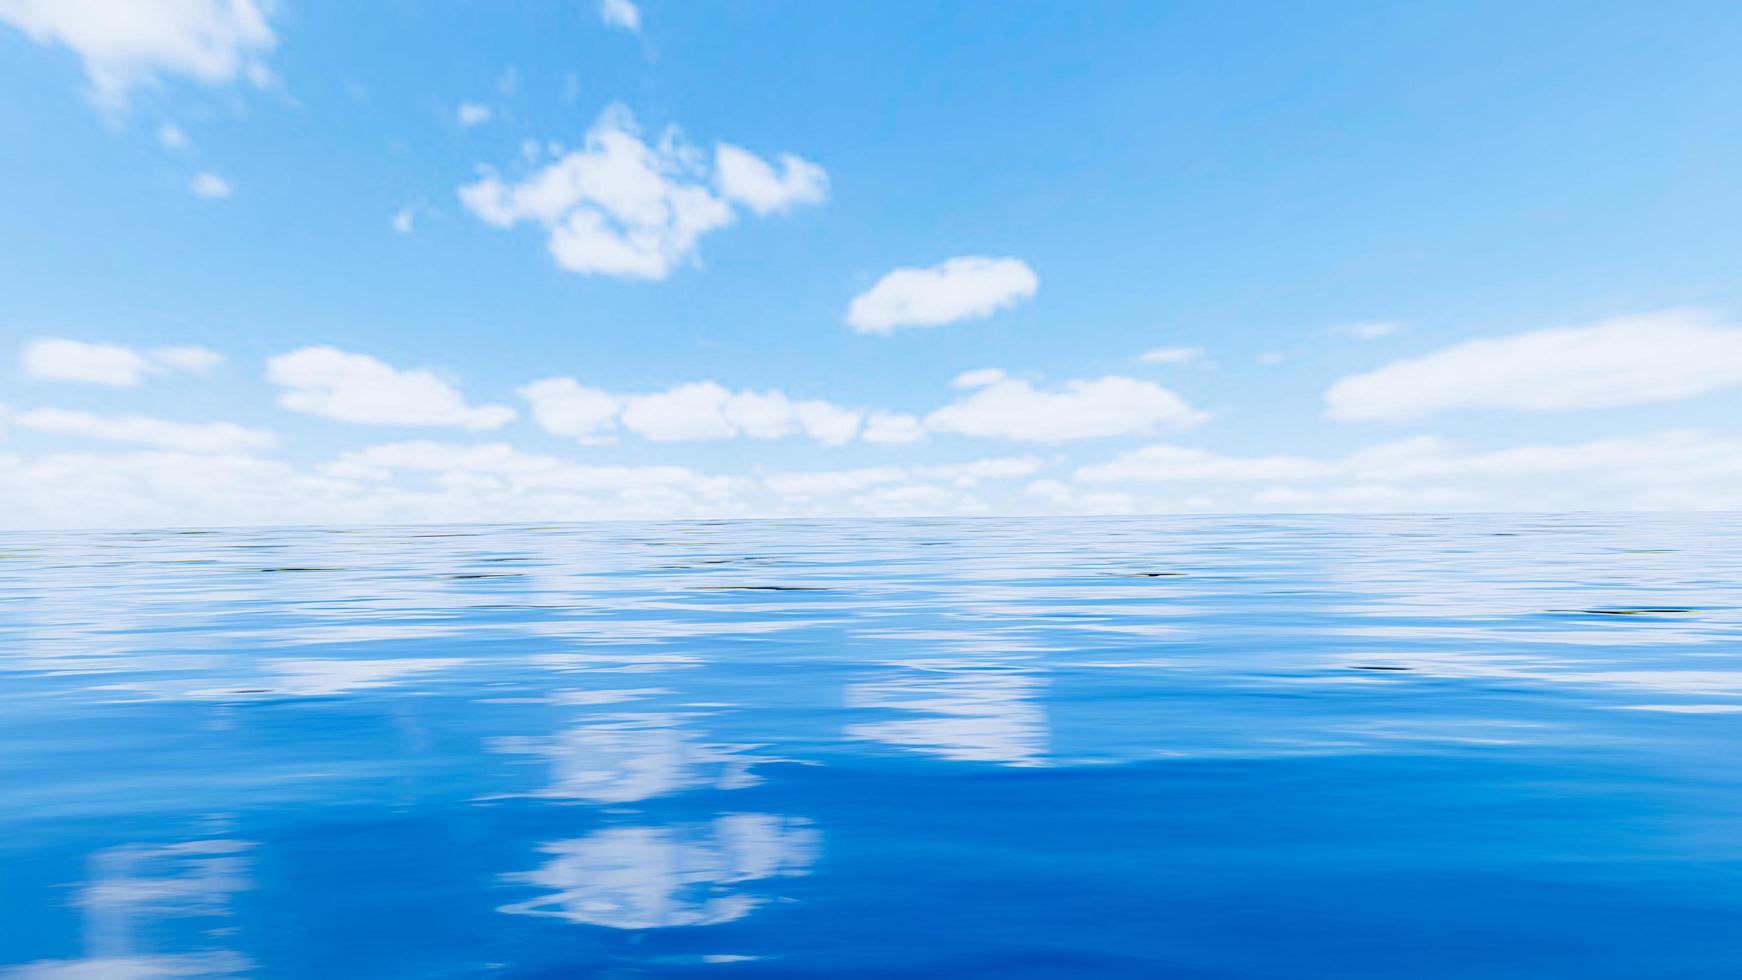 Sea or ocean with waves and clear sky with white clouds. Background or wallpaper sea ocean during daytime. 3D rendering photo